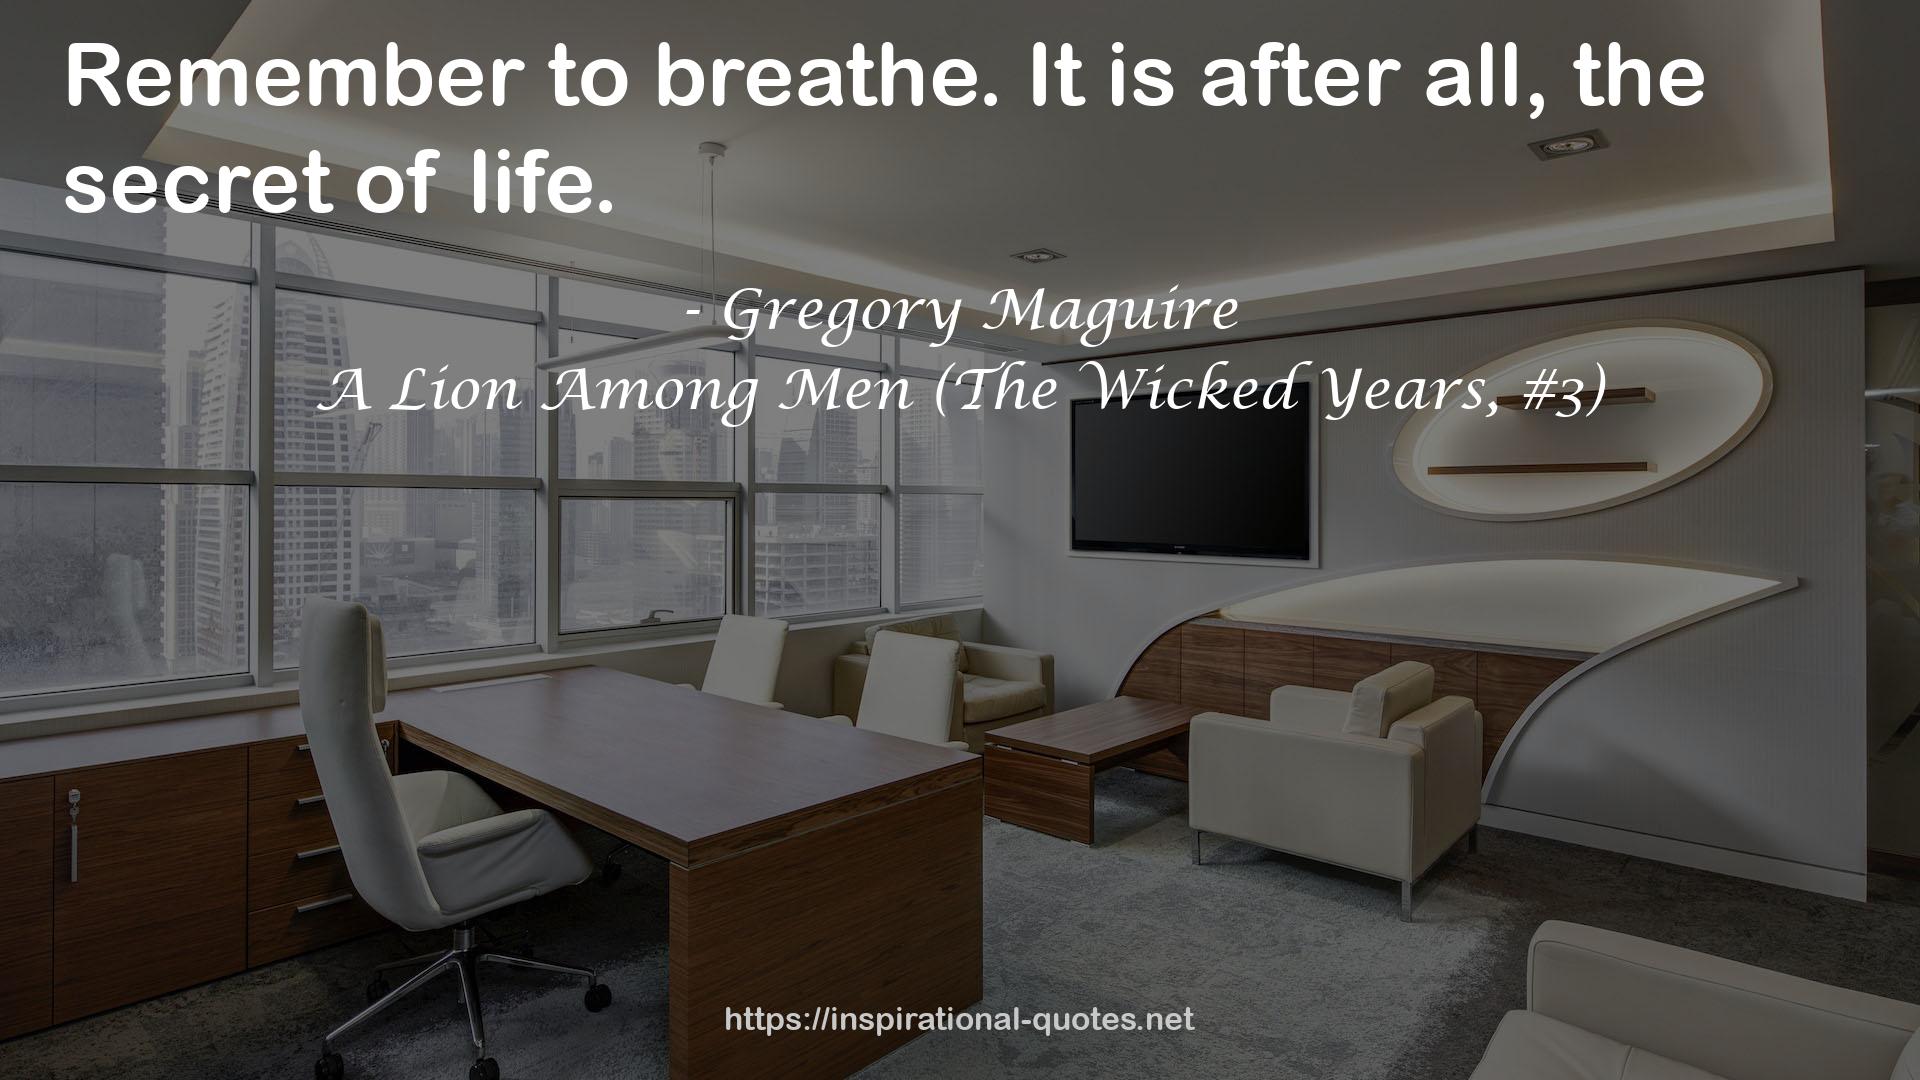 A Lion Among Men (The Wicked Years, #3) QUOTES